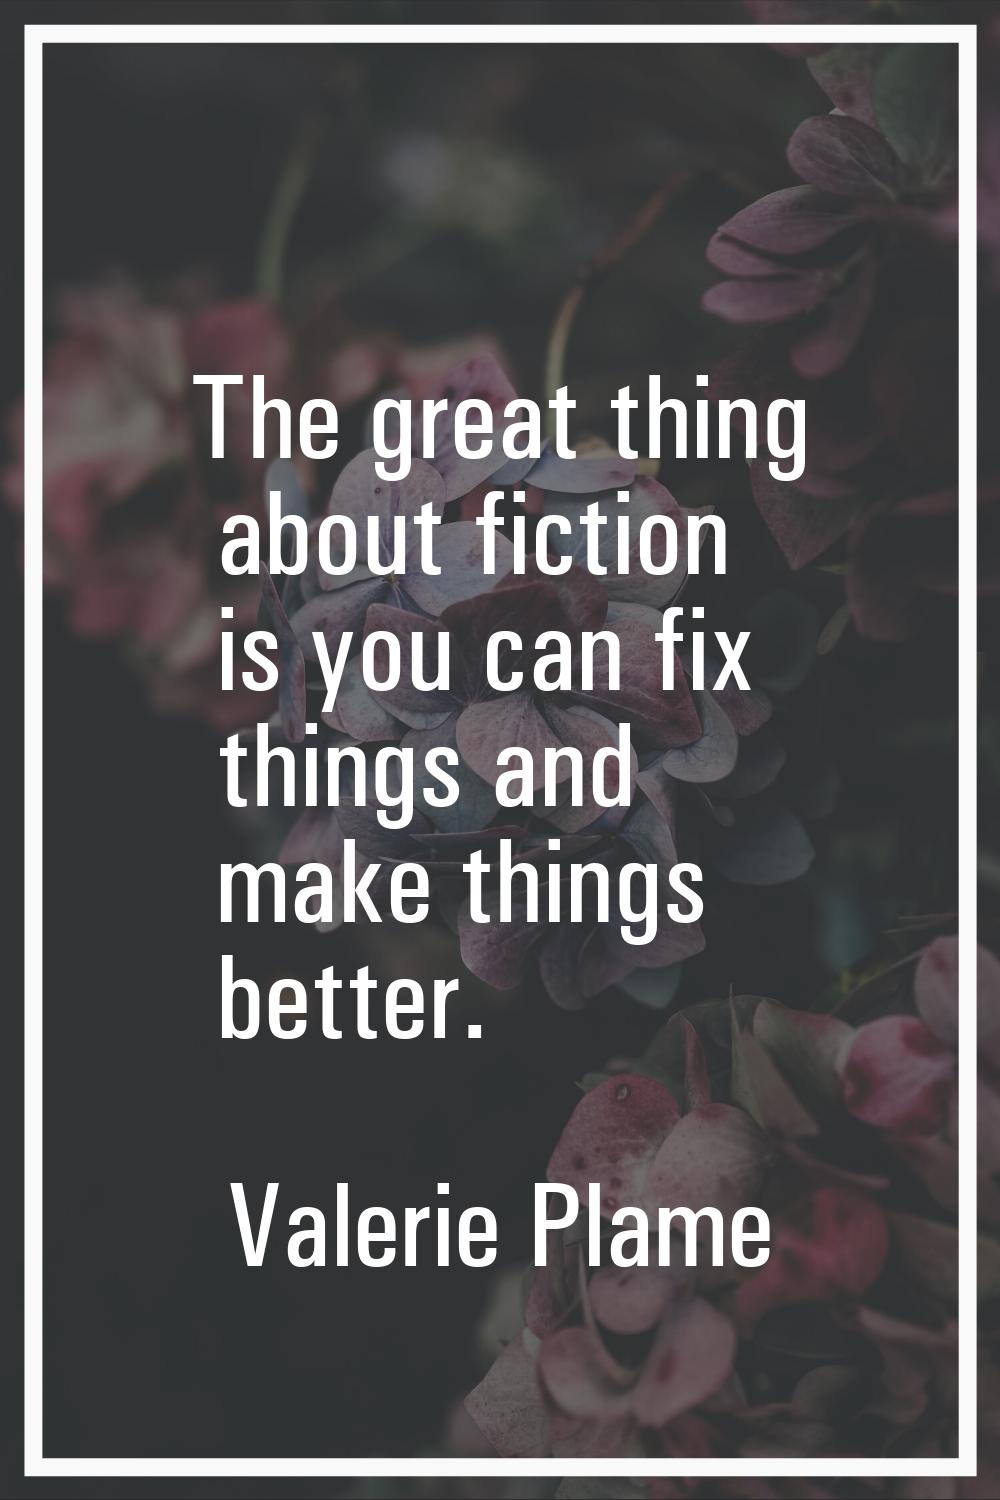 The great thing about fiction is you can fix things and make things better.